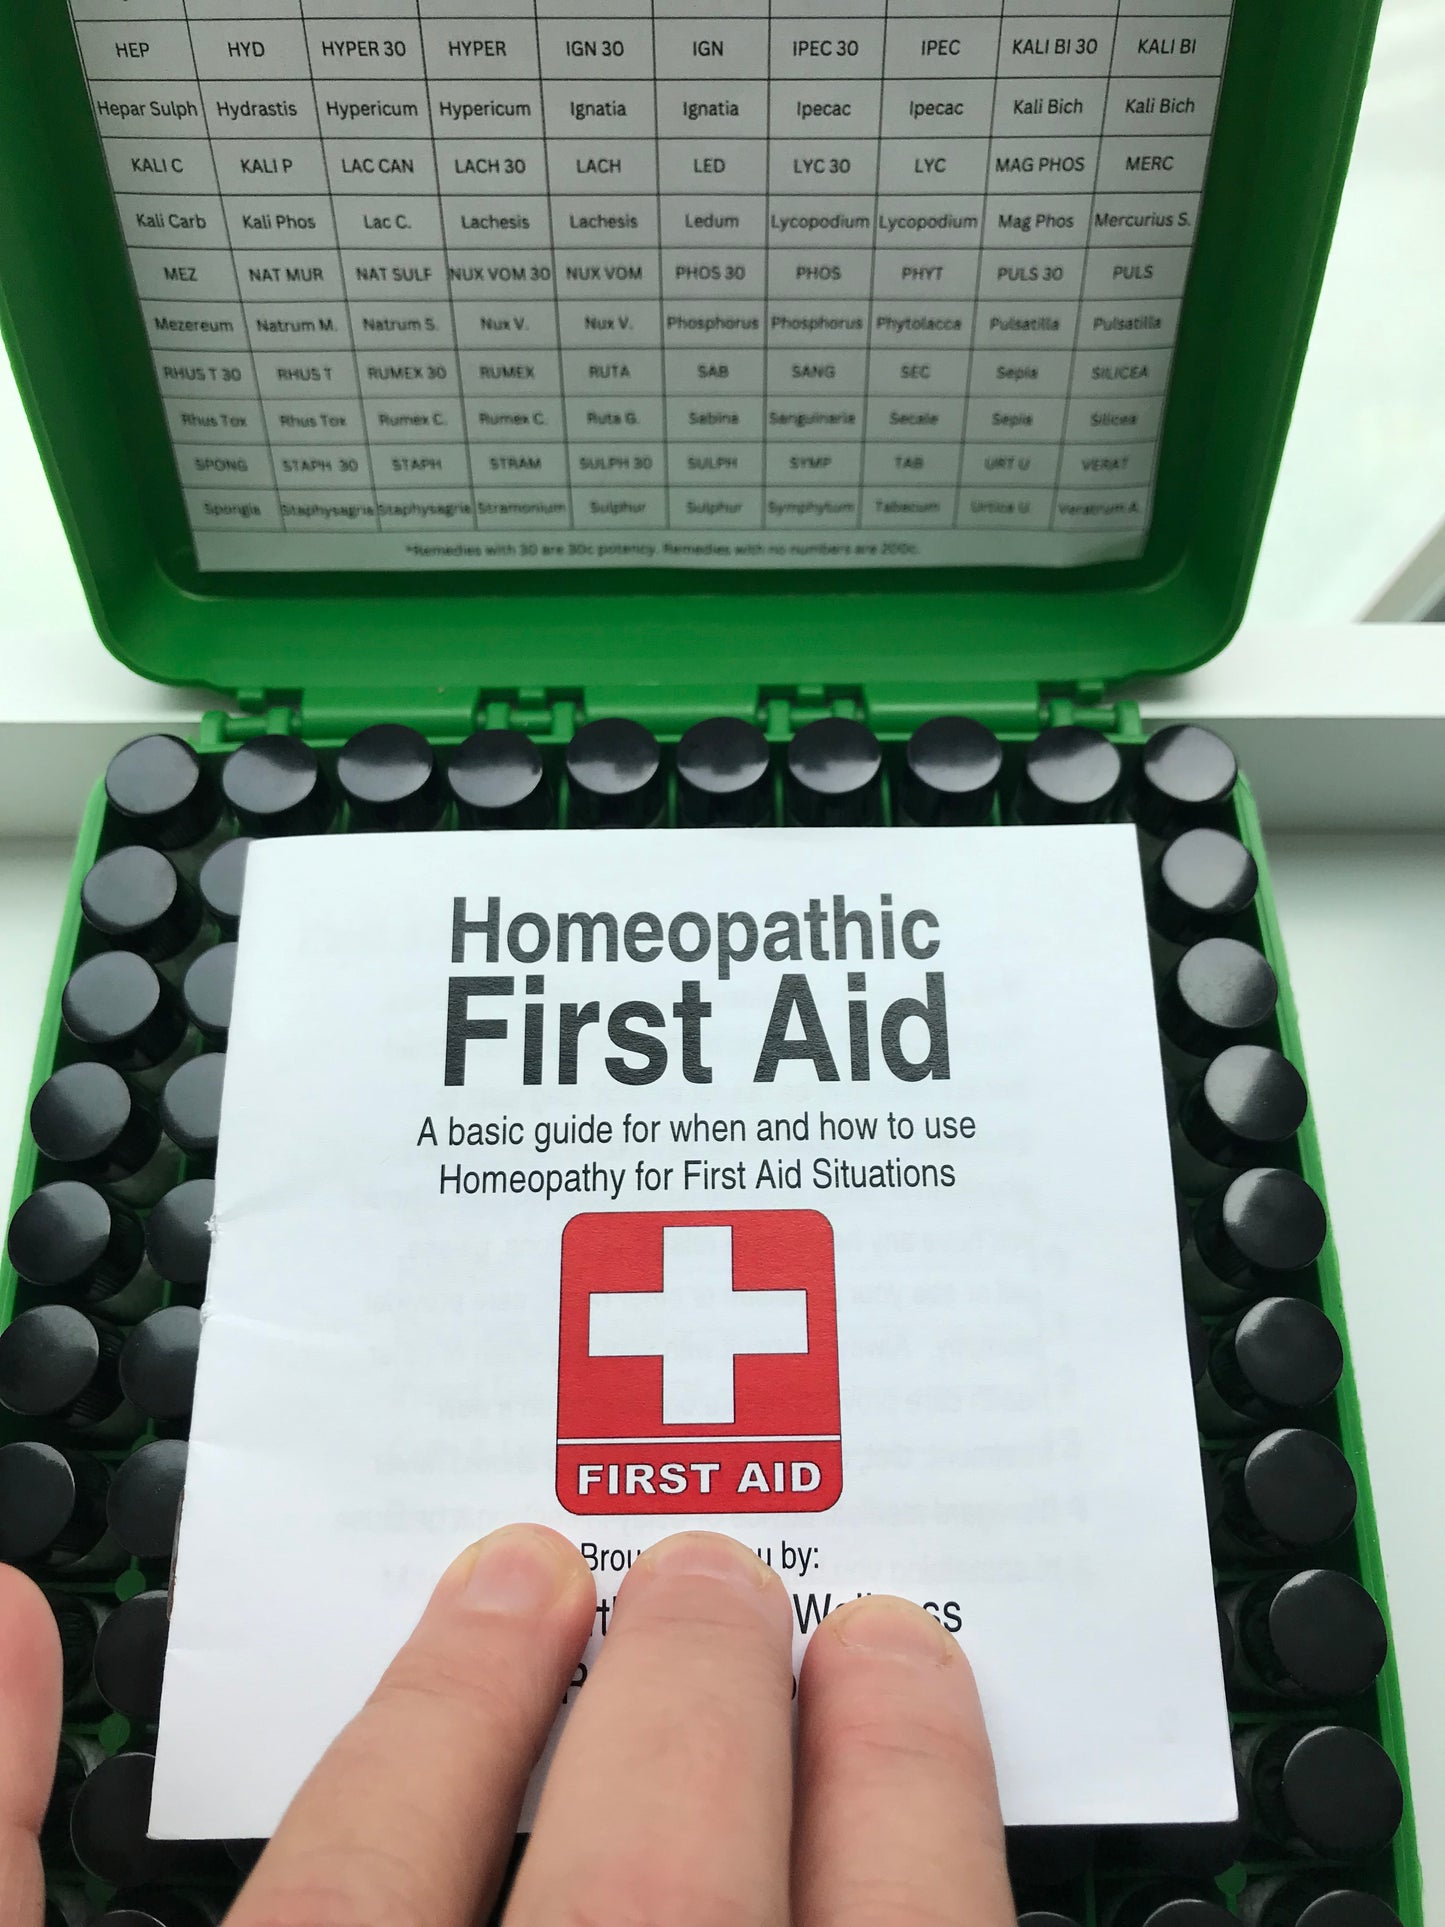 Homeopathic 100 remedy Kit